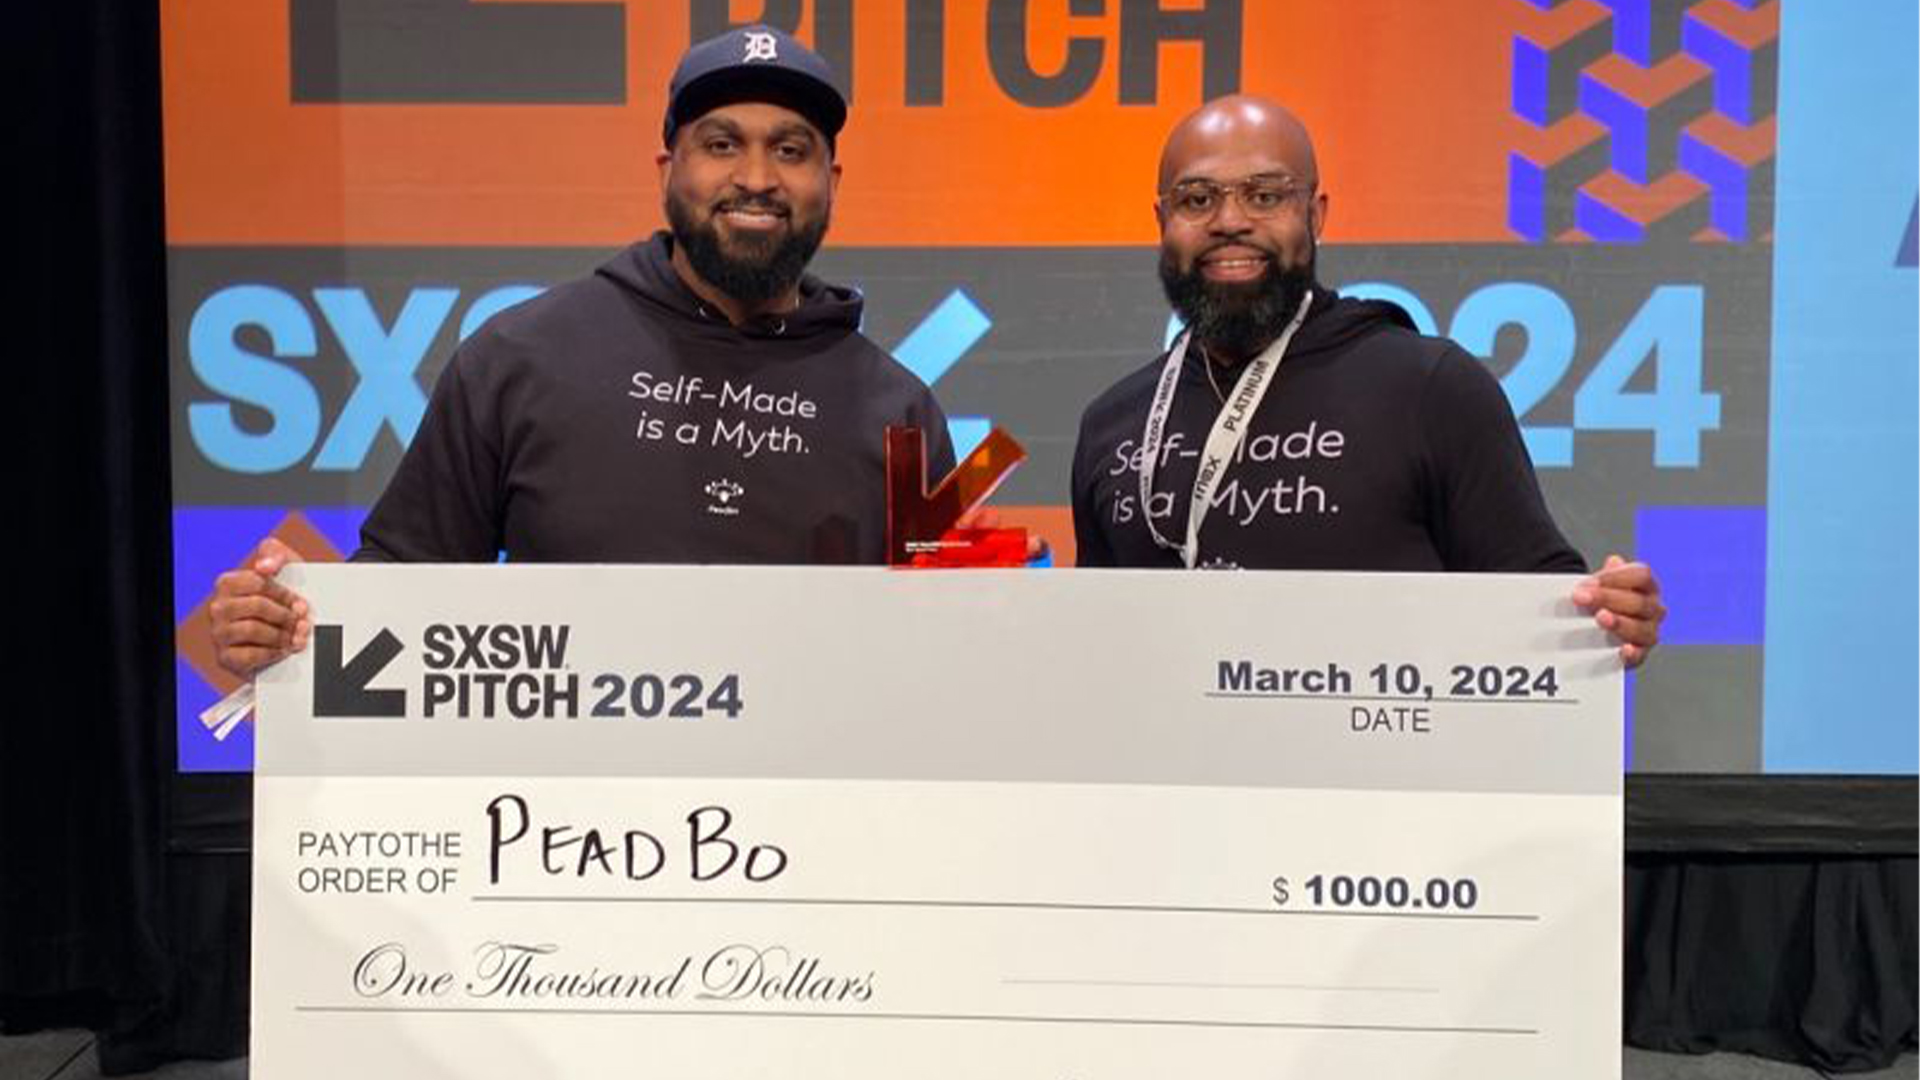 Black-Owned Digital Platform Peadbo Wins $1K Check At SXSW 2024 Pitch Competition